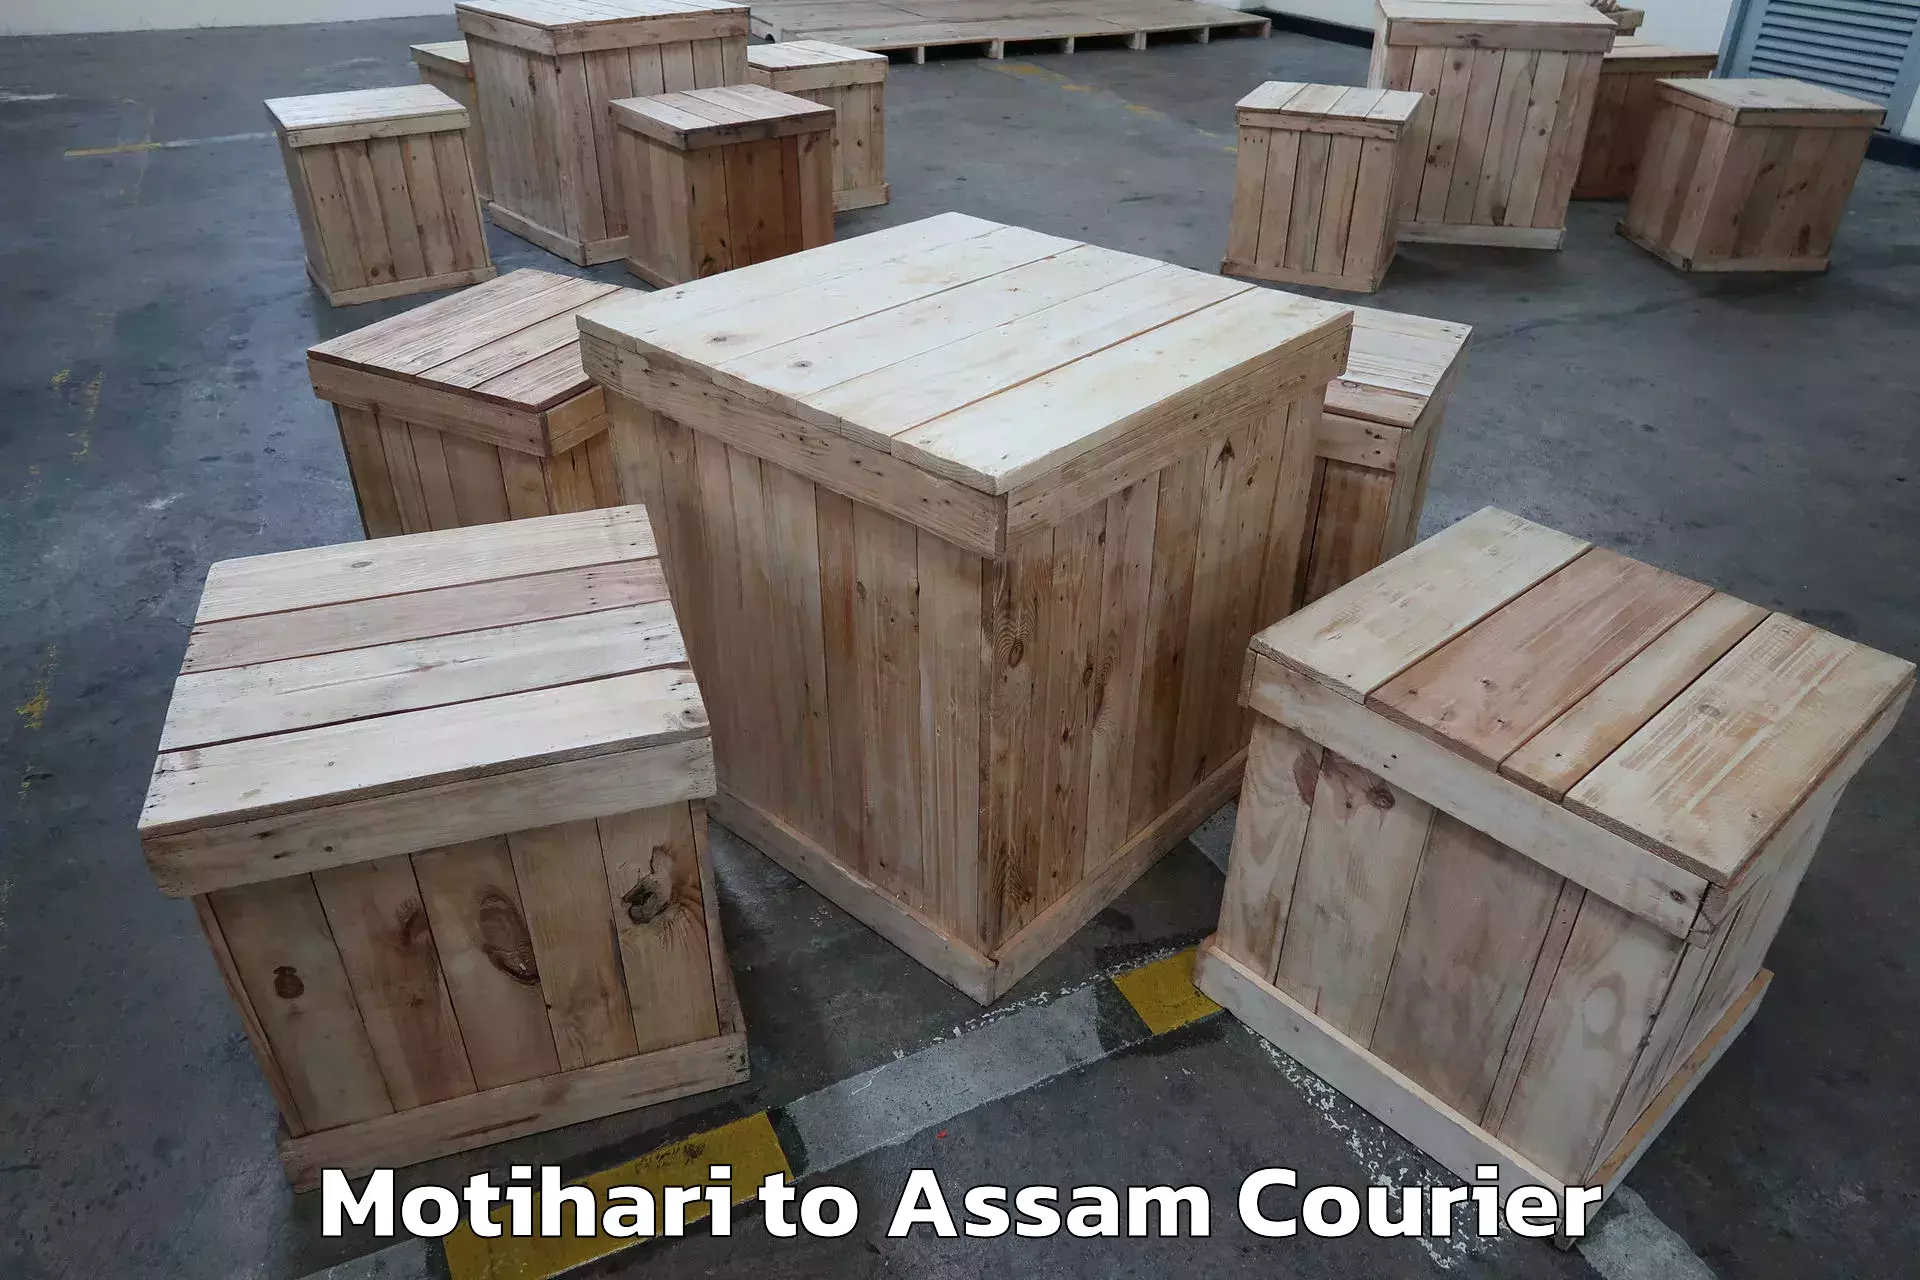 Moving and packing experts Motihari to Silchar